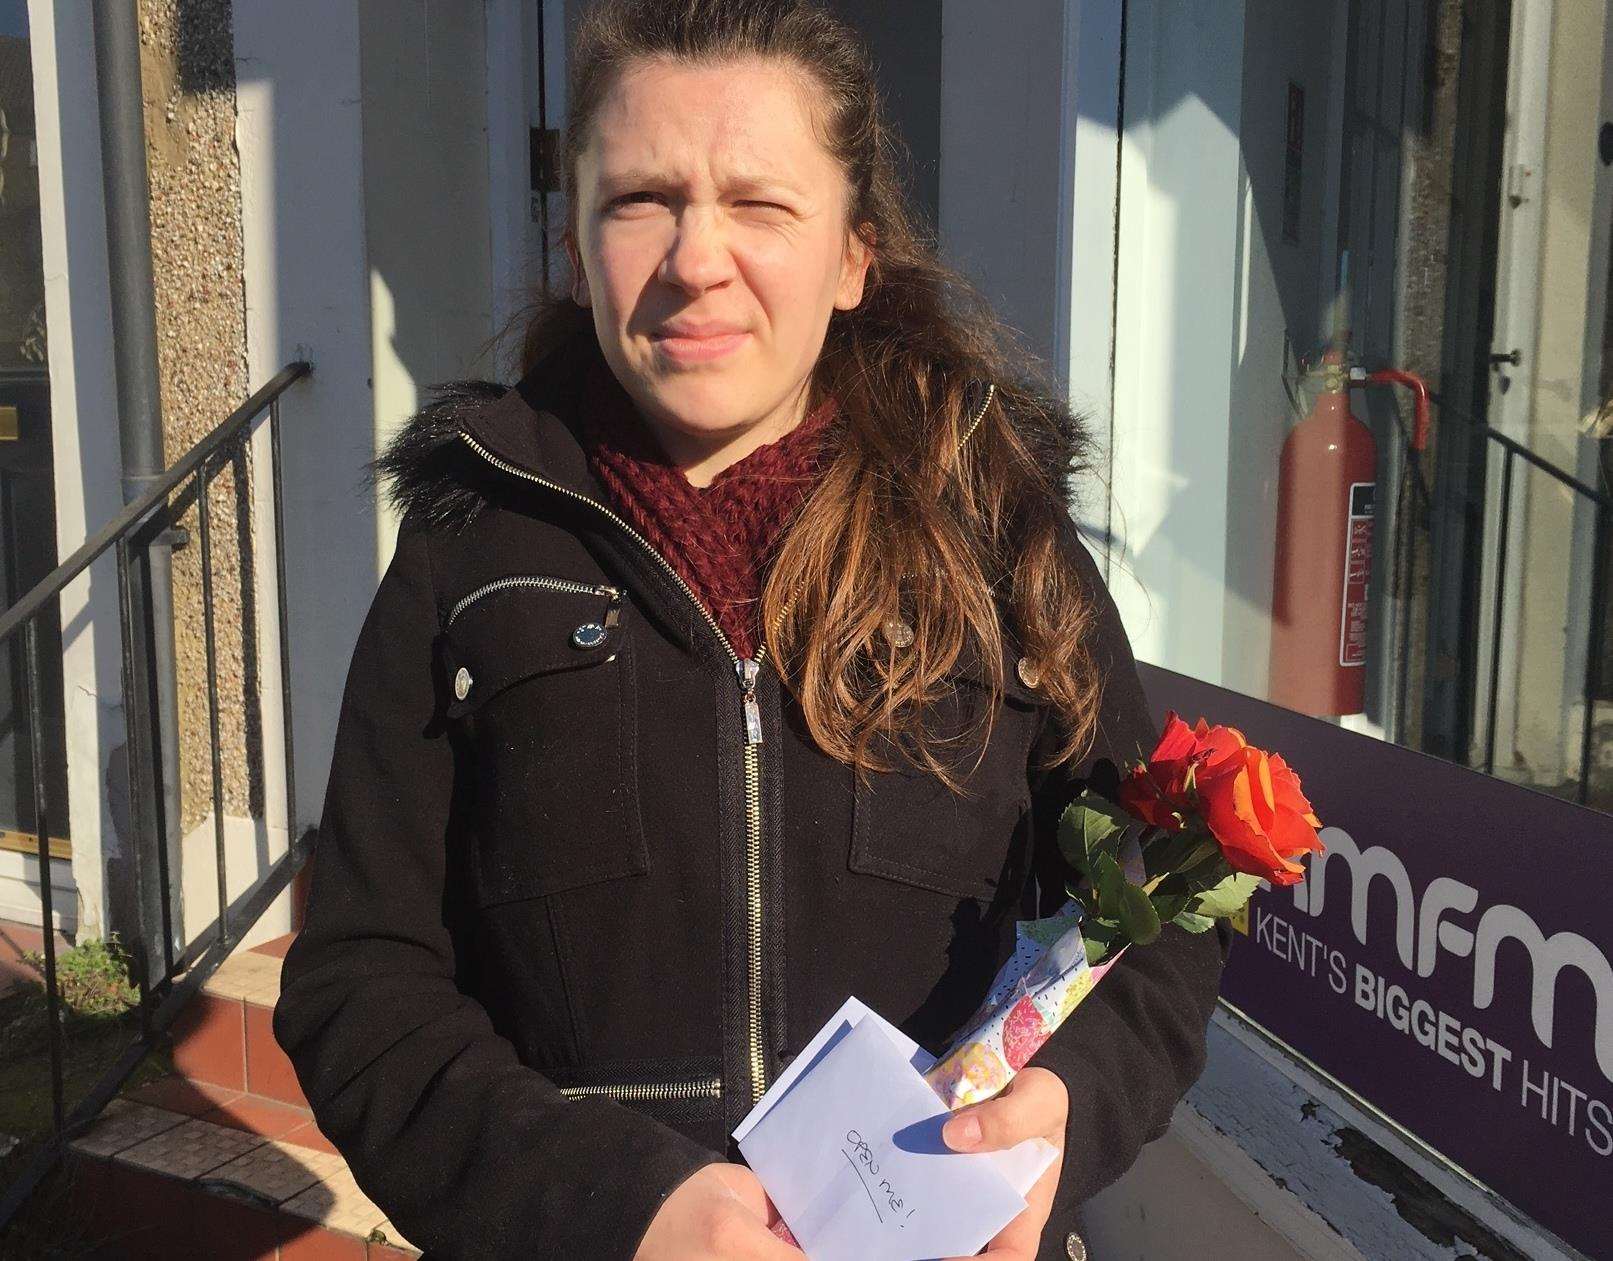 Crystal left roses at different spots in Thanet on Valentine's Day (7252839)